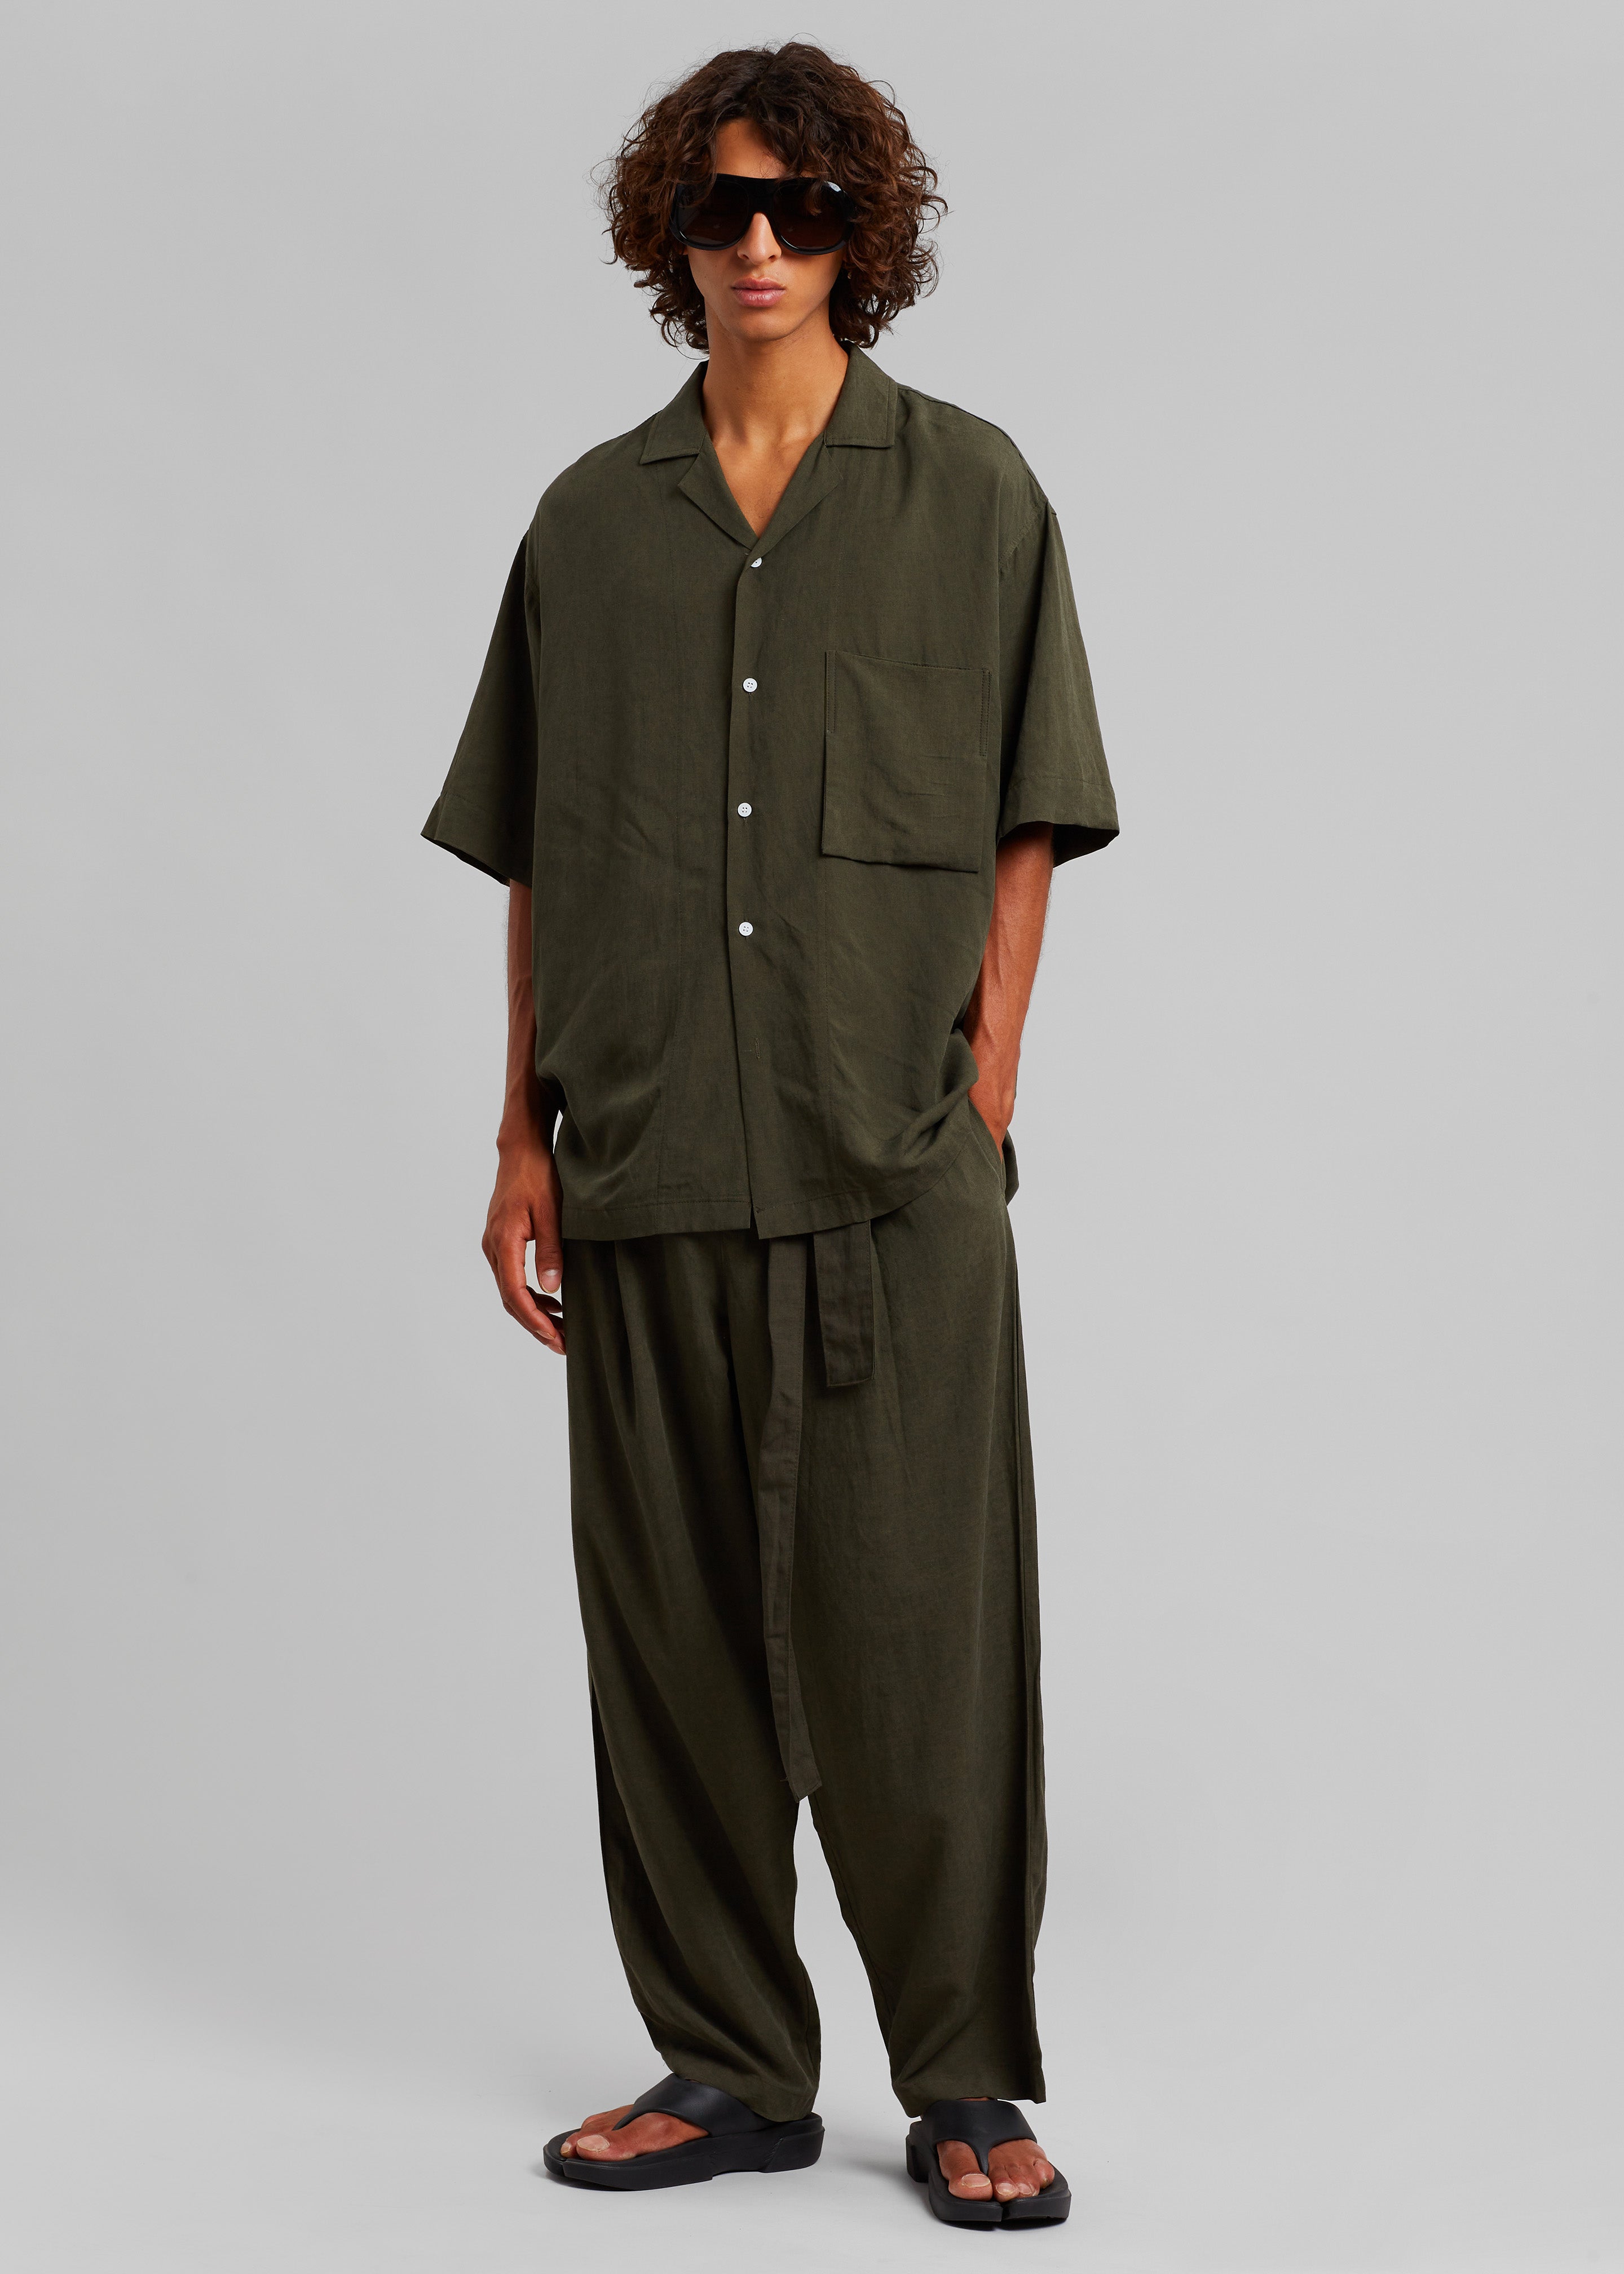 Georg Puch Pants - Olive - 3